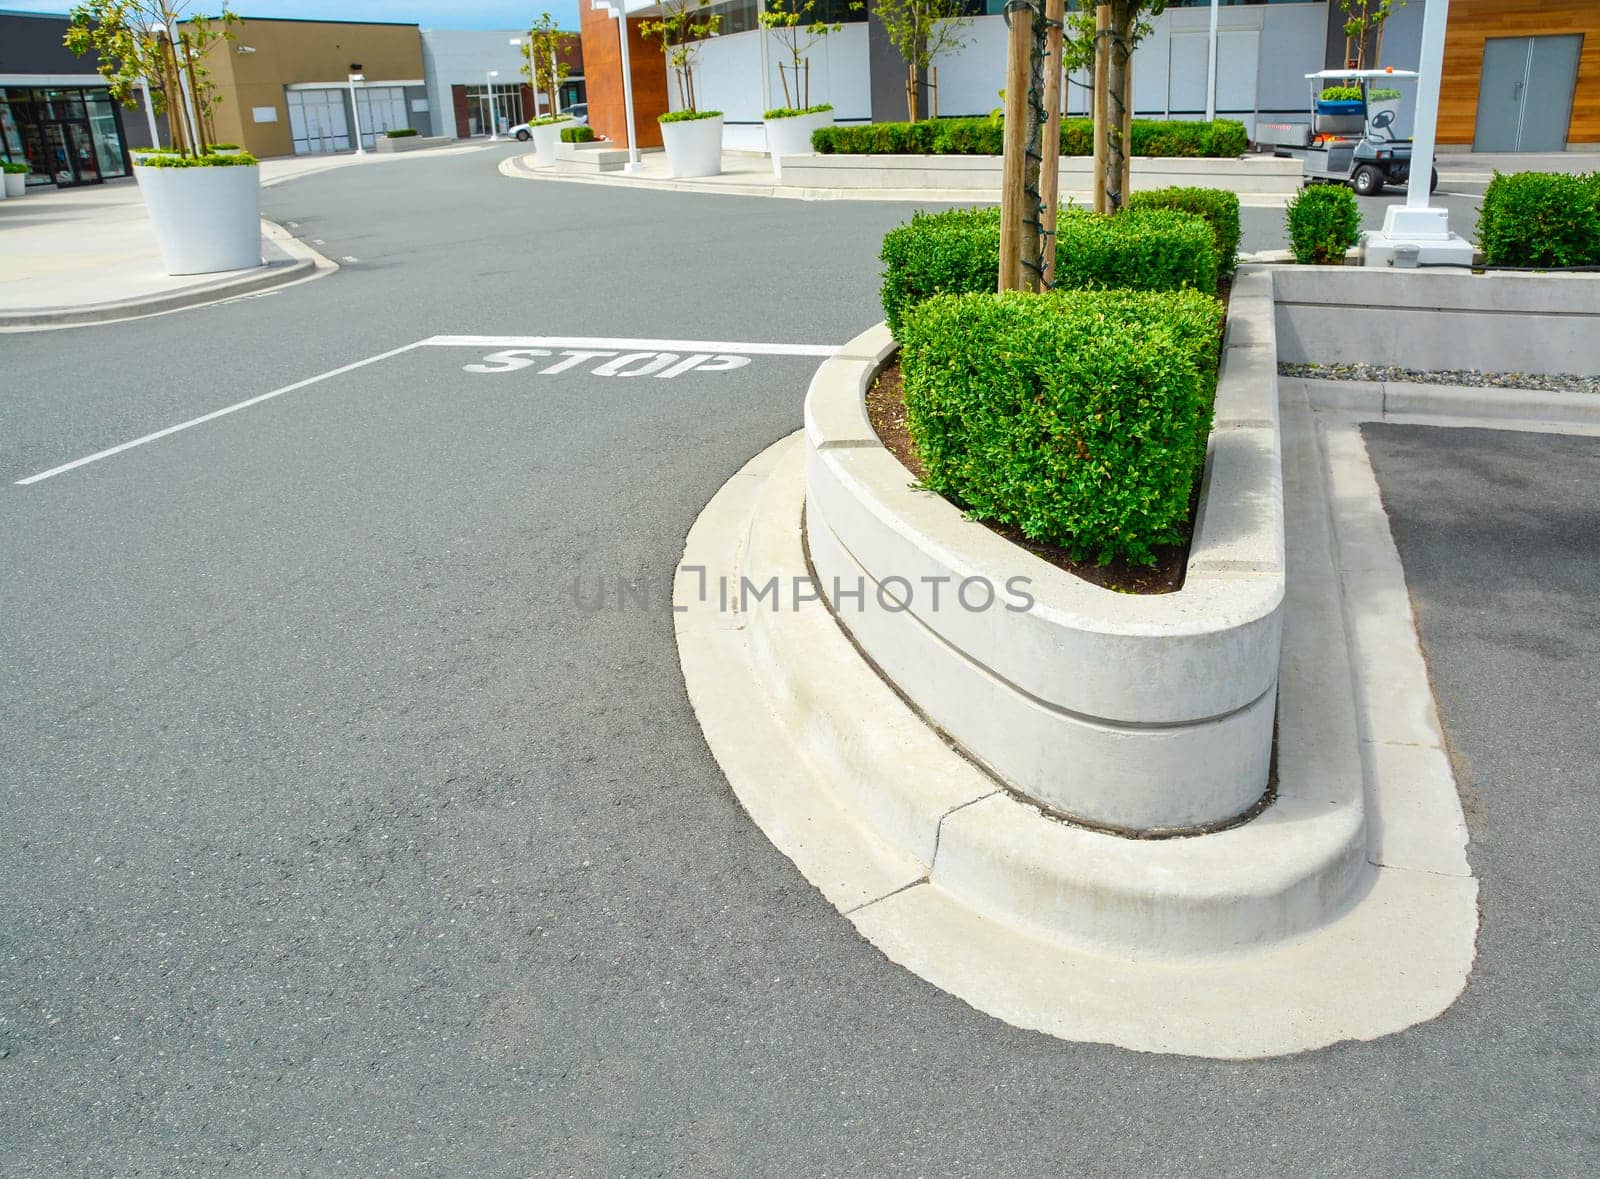 Architectural flowerbed on city street. Decorative road space divider by Imagenet